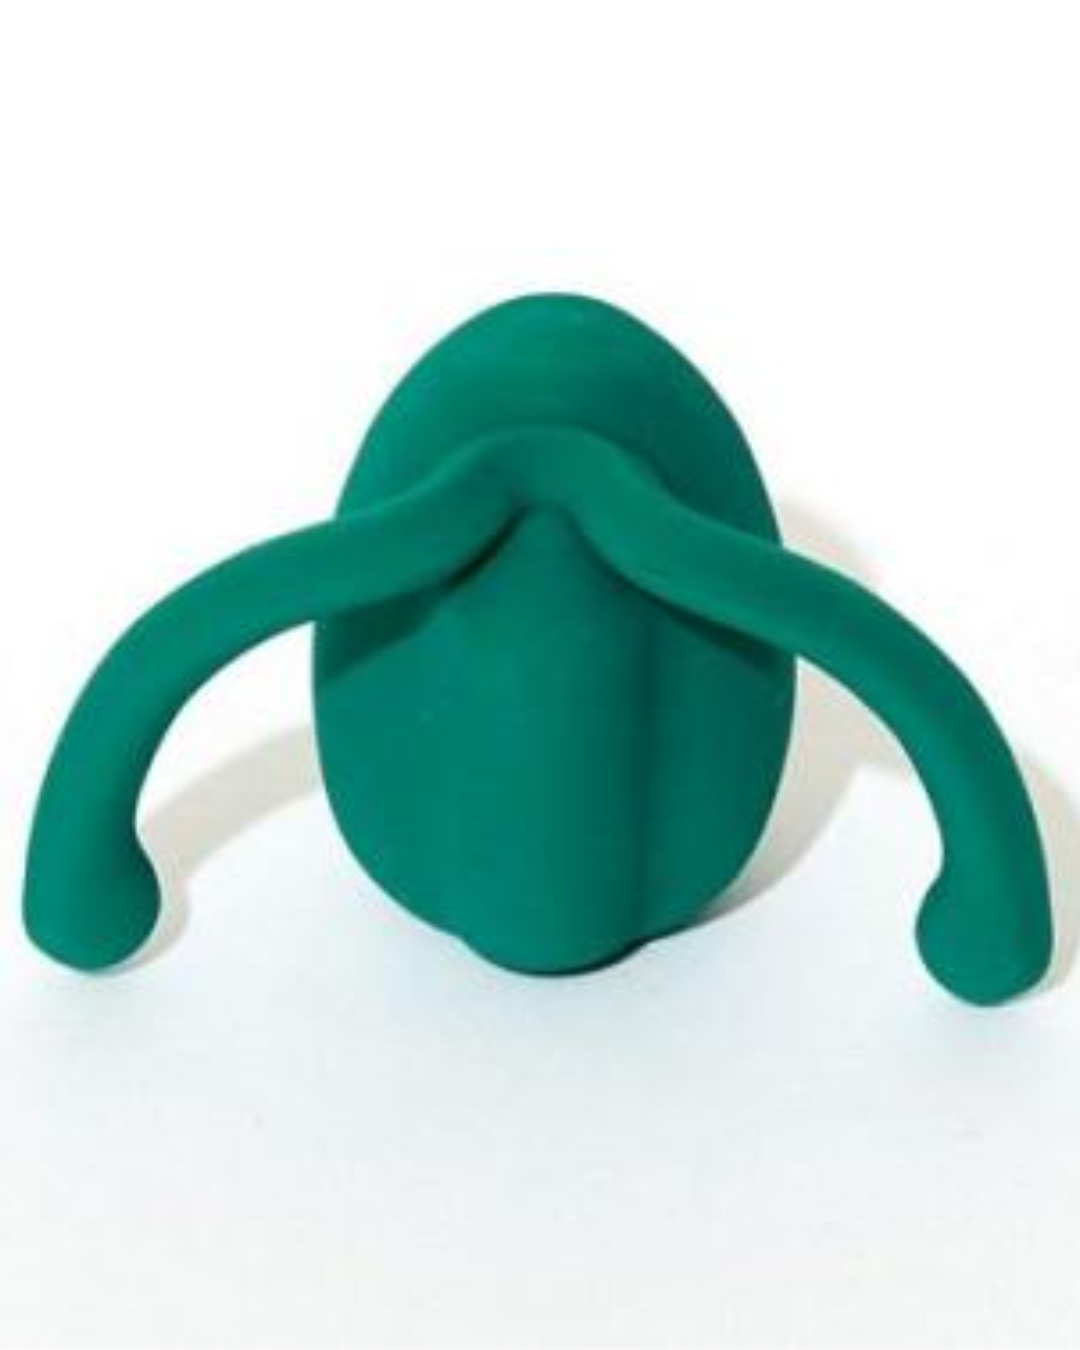 Eva II Hands-Free Silicone Rechargeable Clitoral Vibrator by Dame - Fir Green back view of the wings